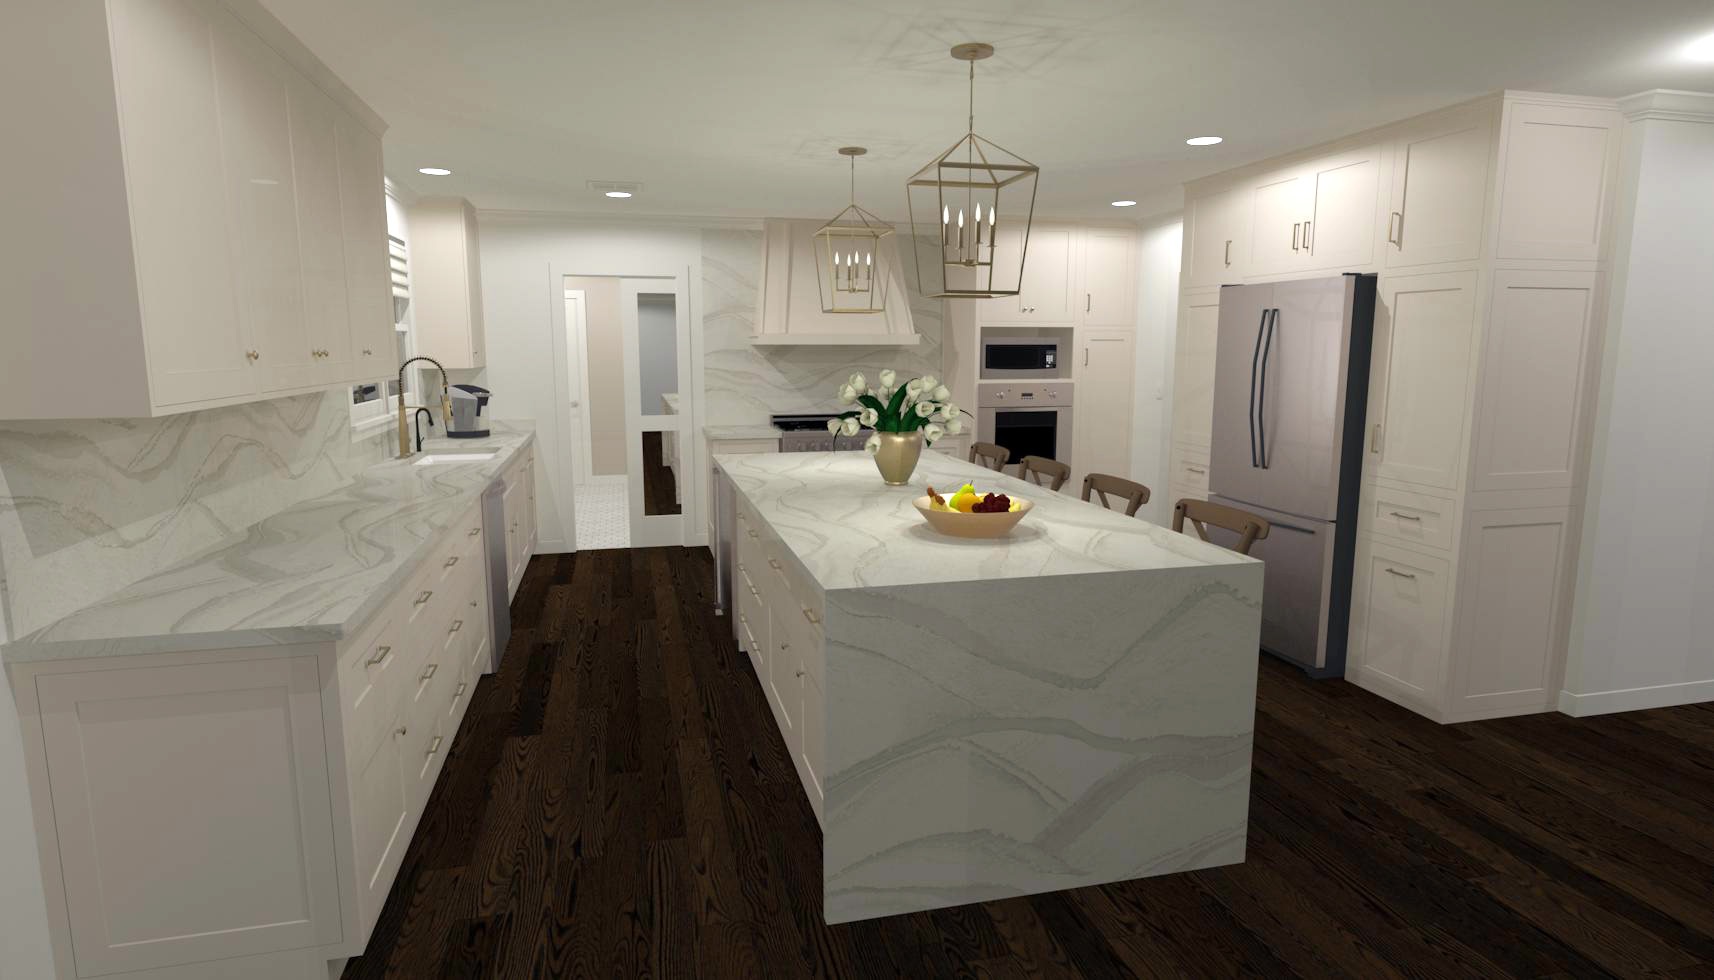 The rendering of a kitchen with white cabinets, gold fixtures and an island with a white waterfall countertop.